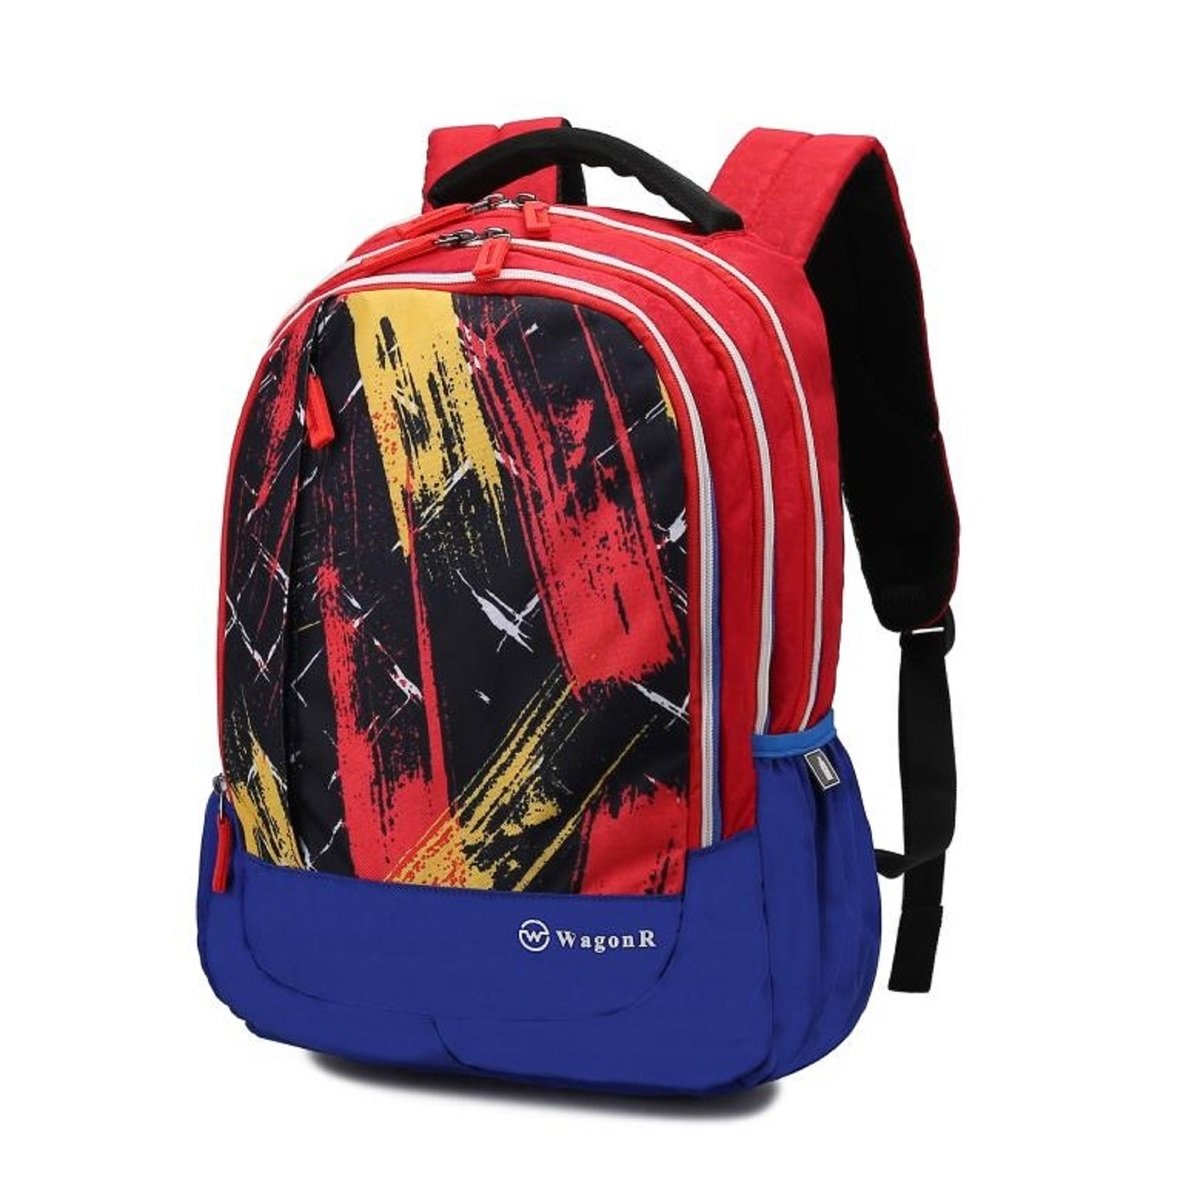 Wagon-R Backpack BP198014 19" Assorted Colors